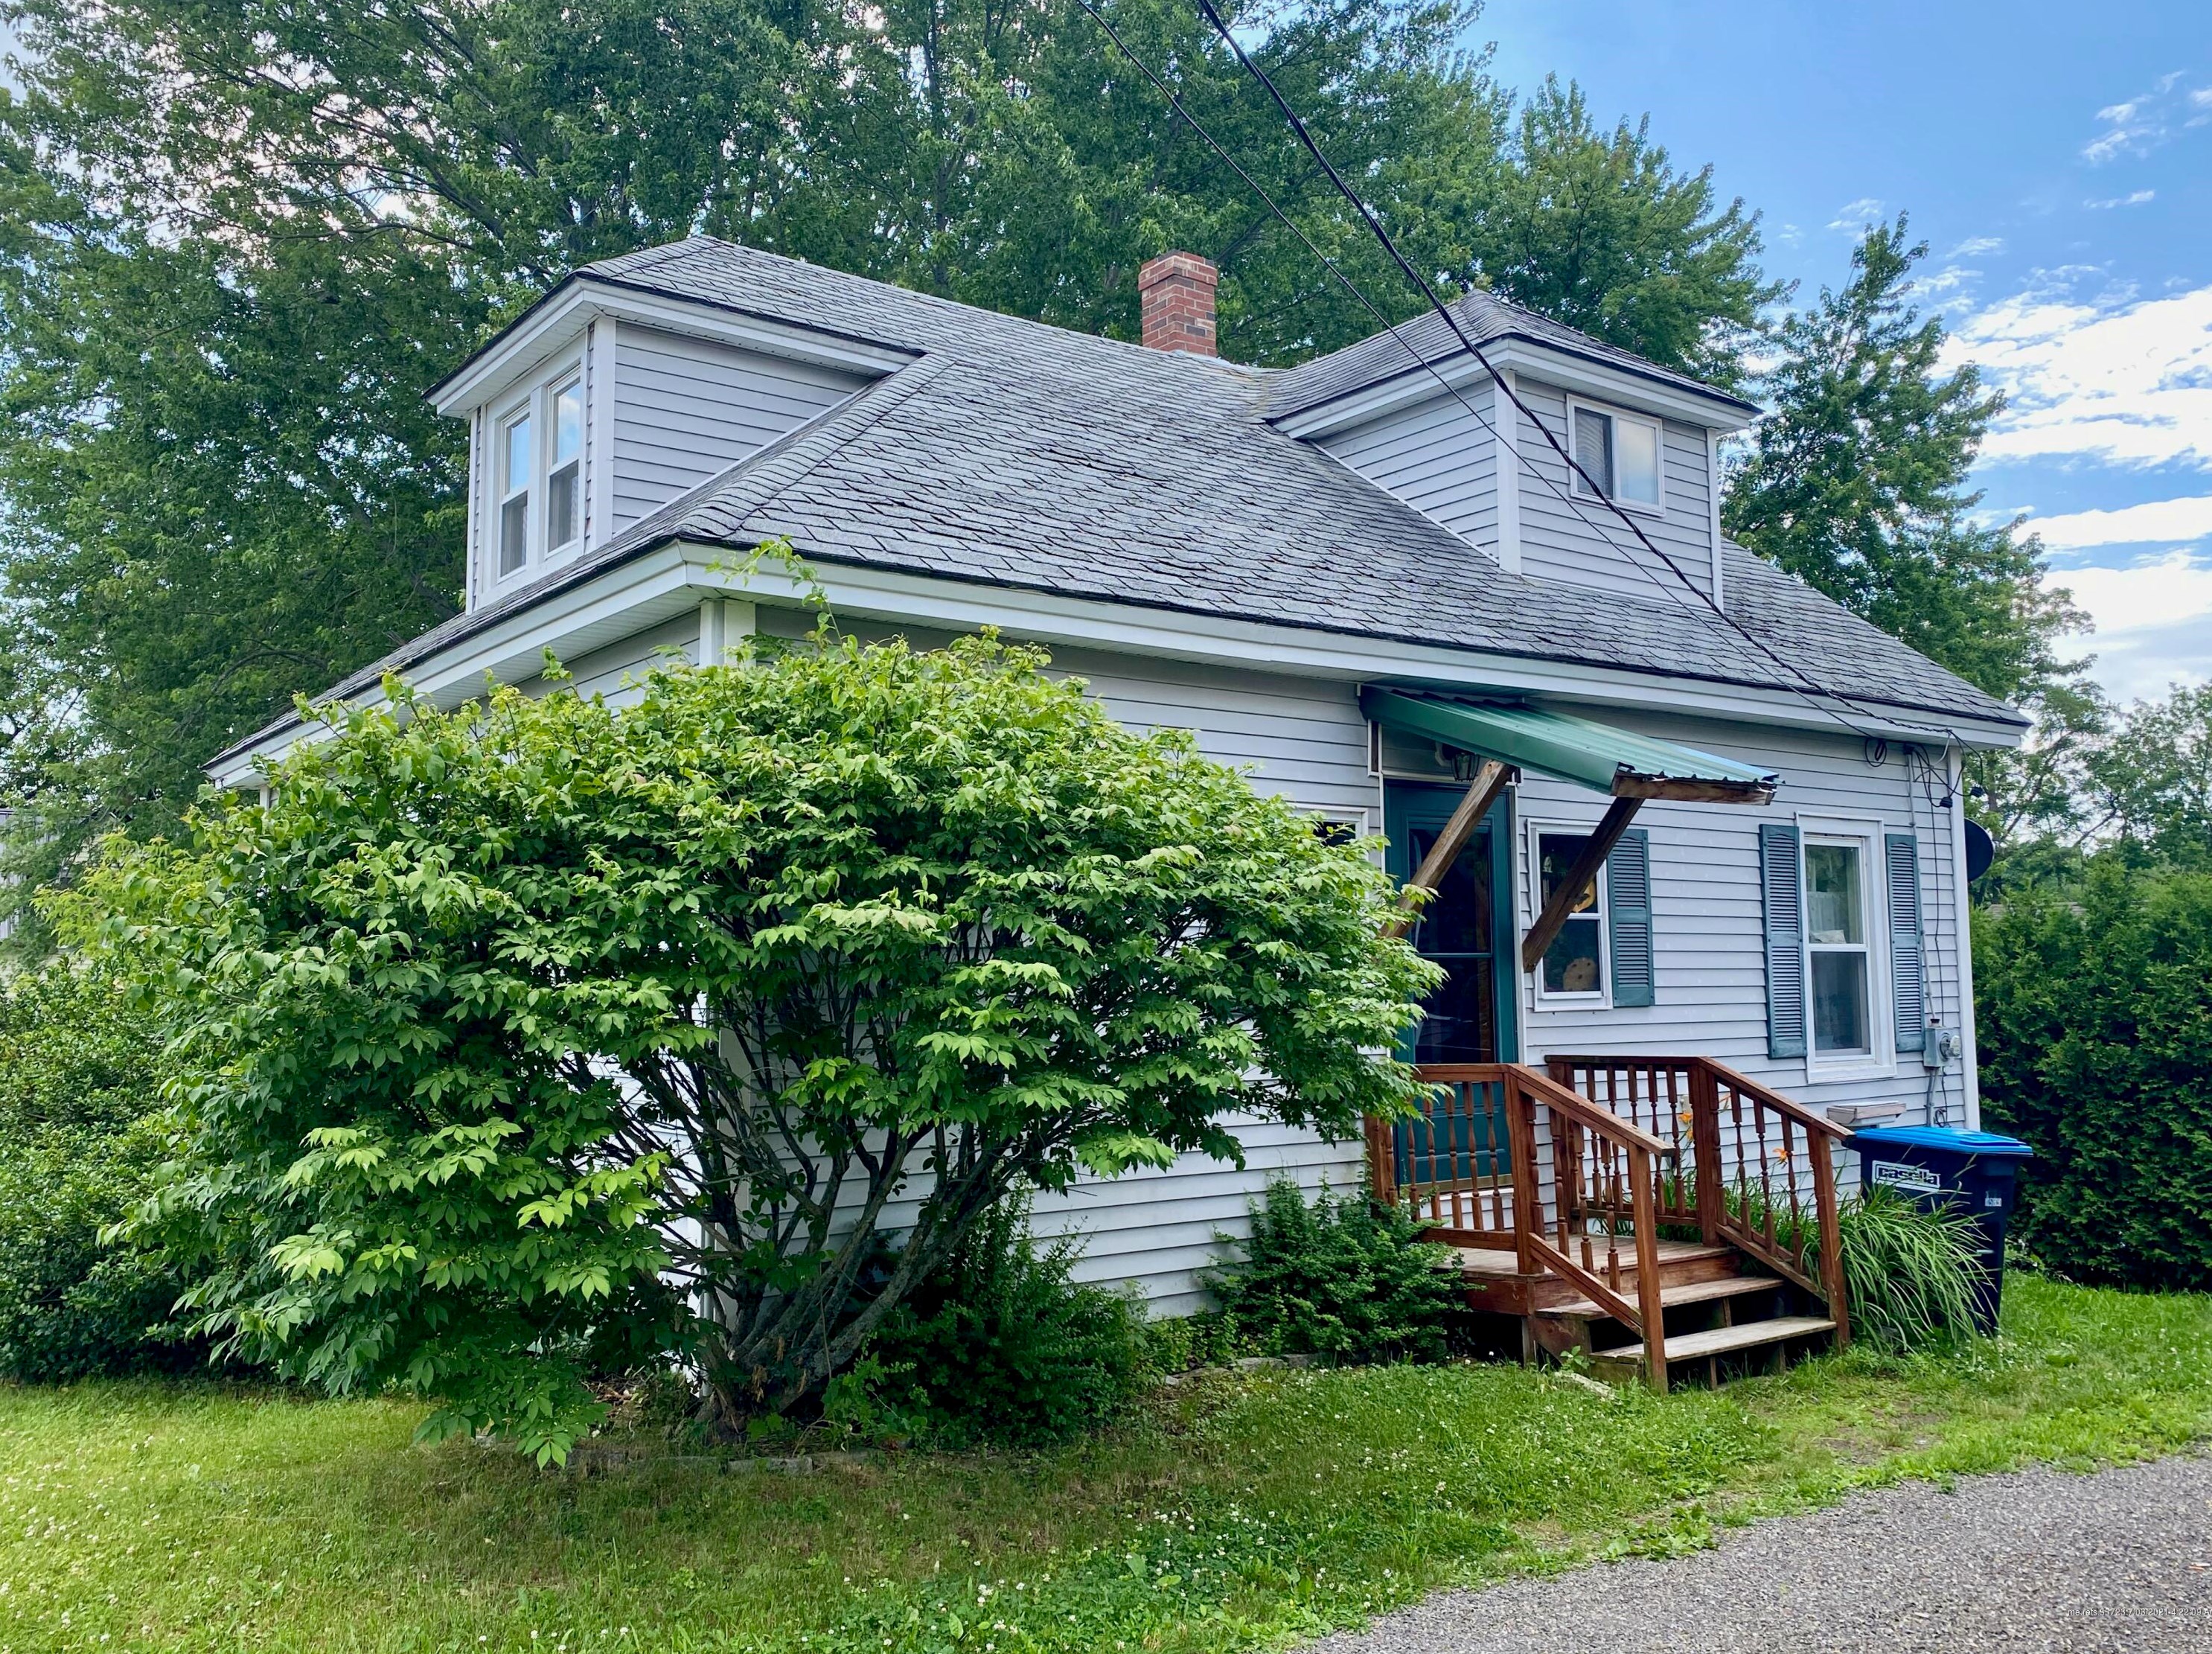 77 Bodwell St, Old Town, ME 04468